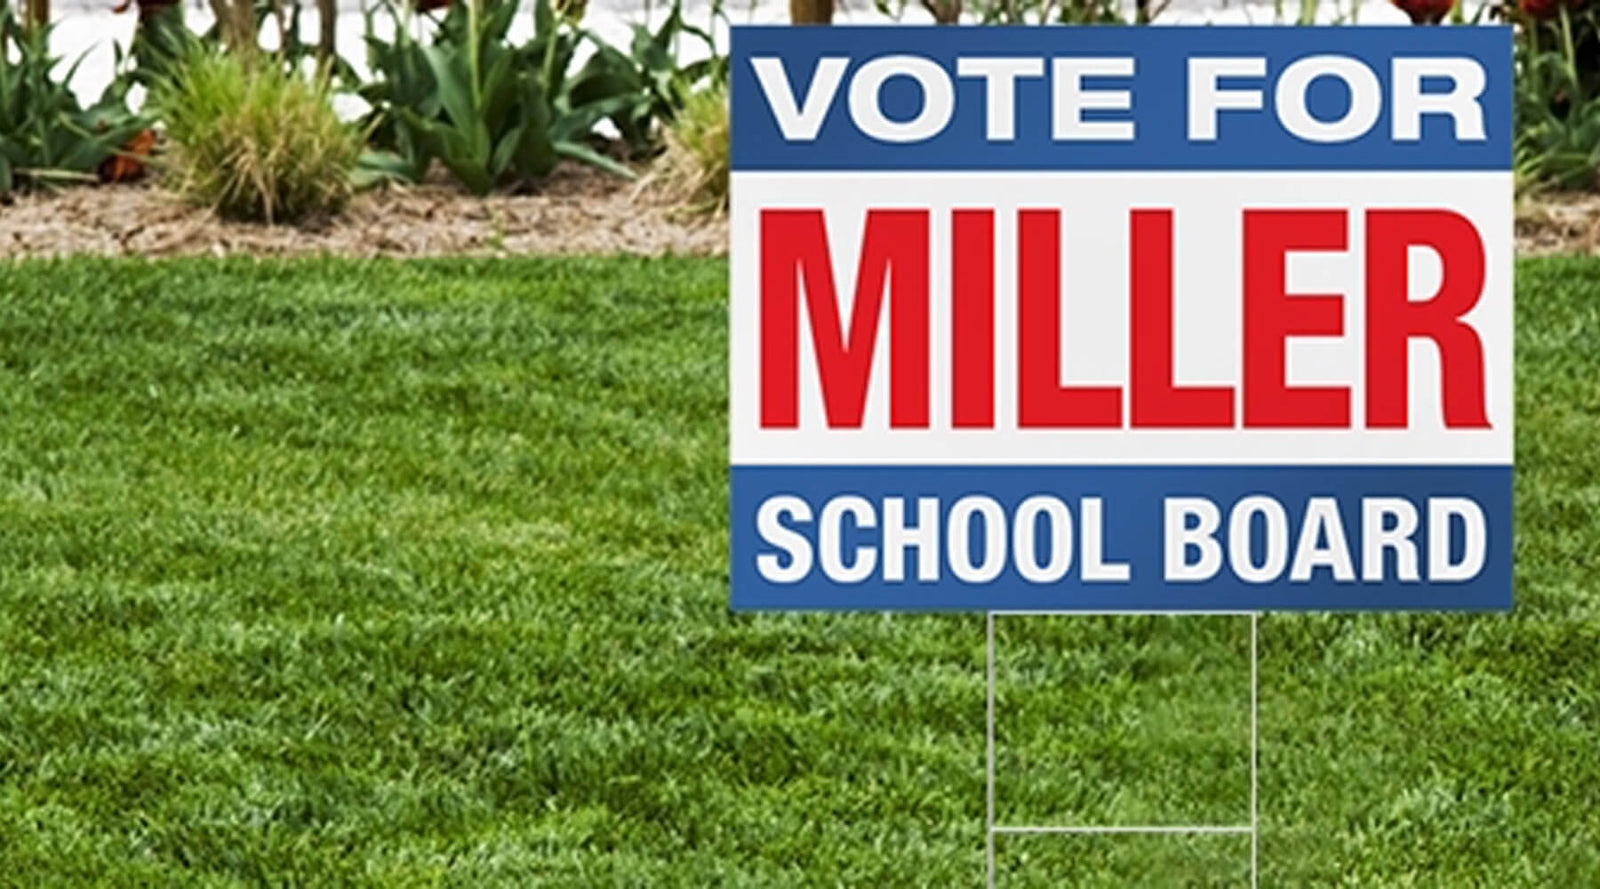 Campaign yard sign reading 'Vote For Miller School Board' displayed on a front lawn